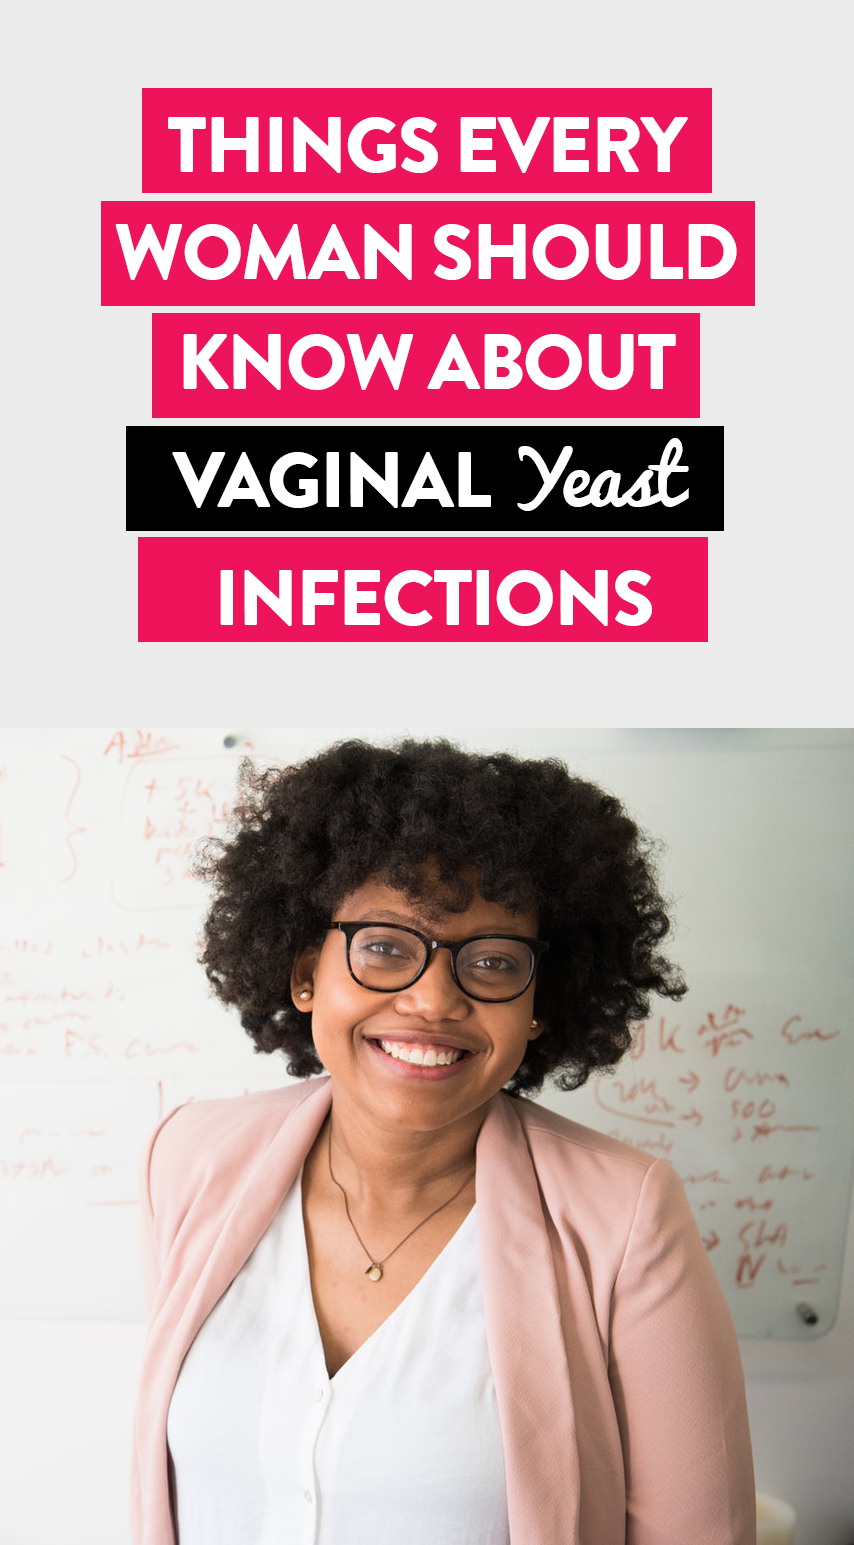 About vaginal yeast infections